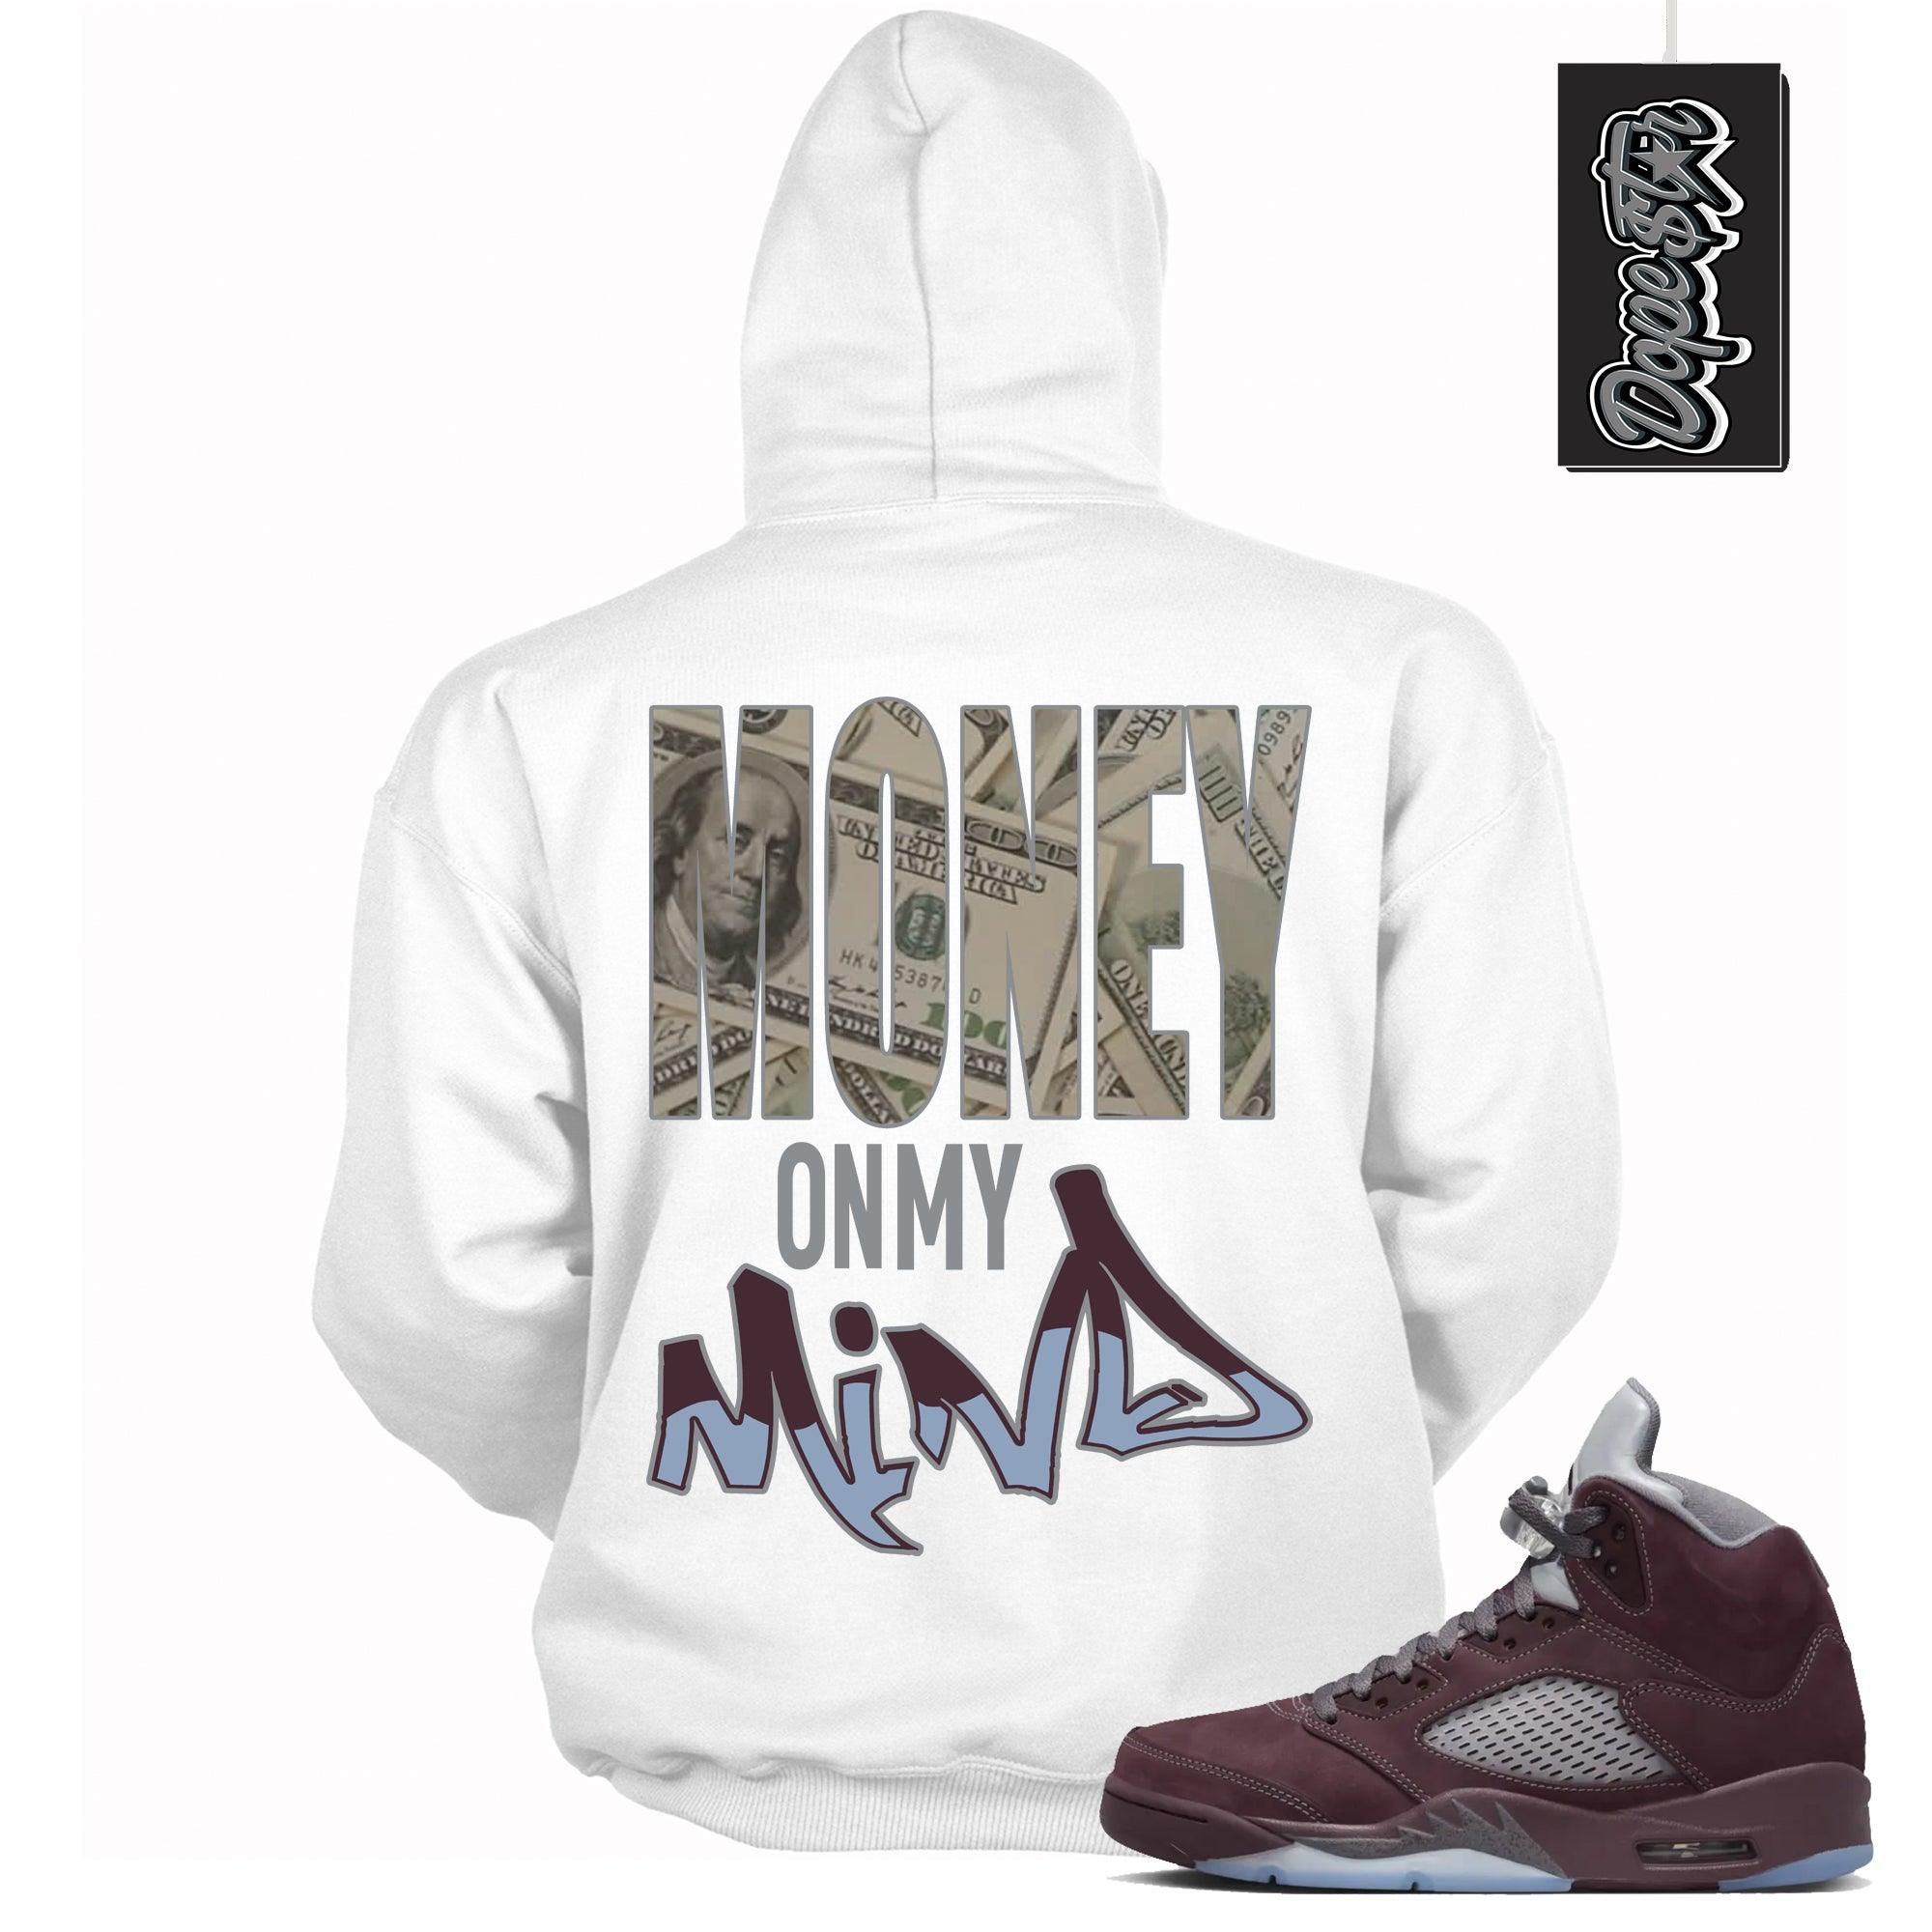 Cool White Graphic Hoodie with “ Money On My Mind “ print, that perfectly matches Air Jordan 5 Burgundy 2023 sneakers